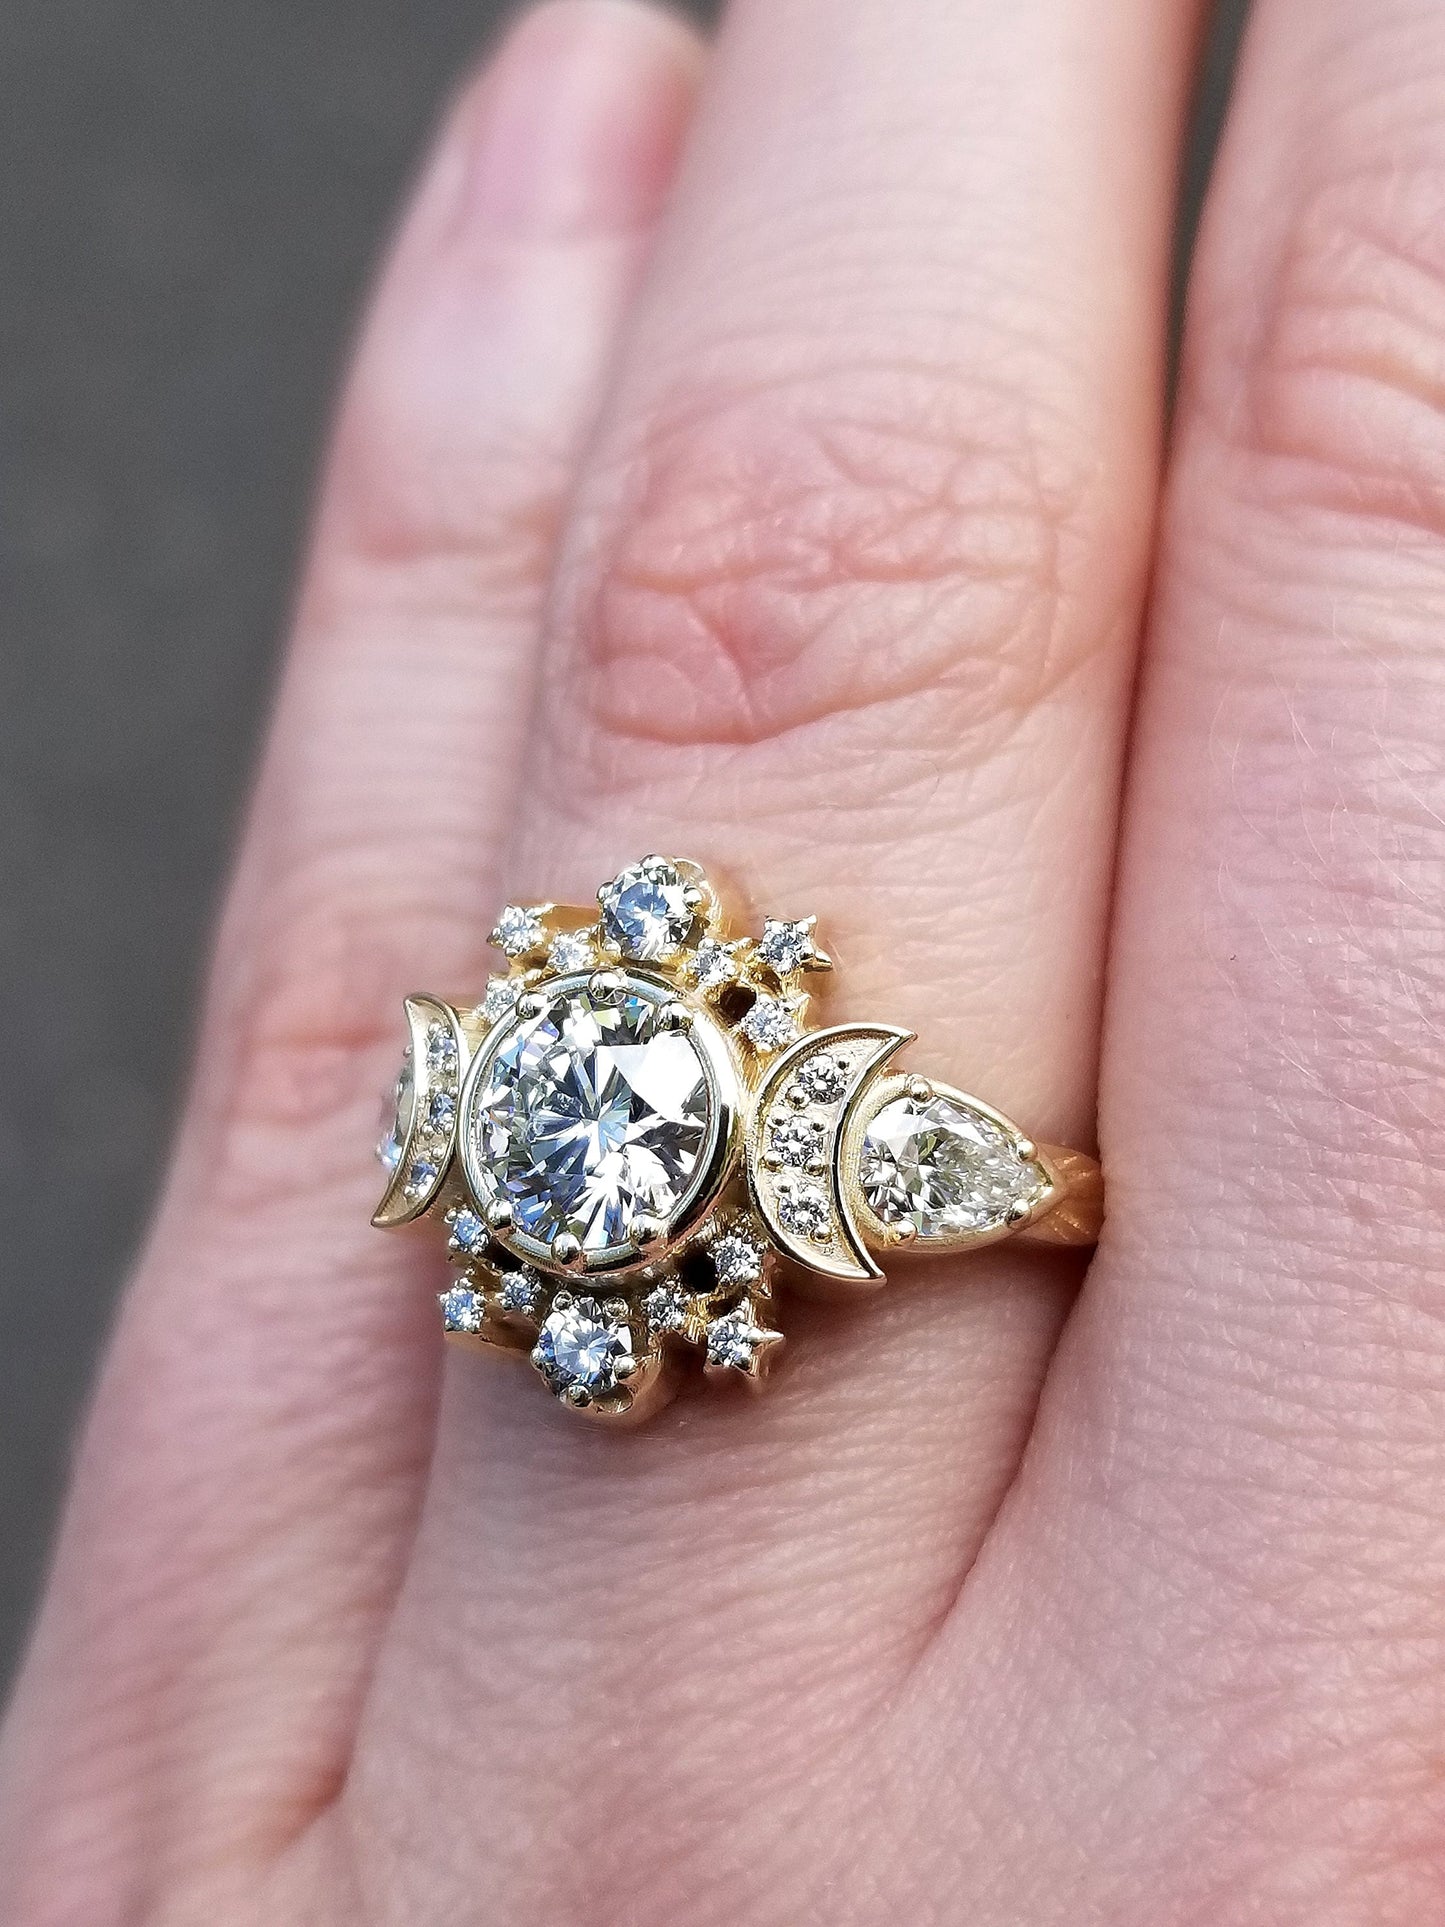 Infinite Cosmos Engagement Ring with Diamond Stars and Crescent Moons - Unique Modern Wedding Ceremony Ring 14k Gold